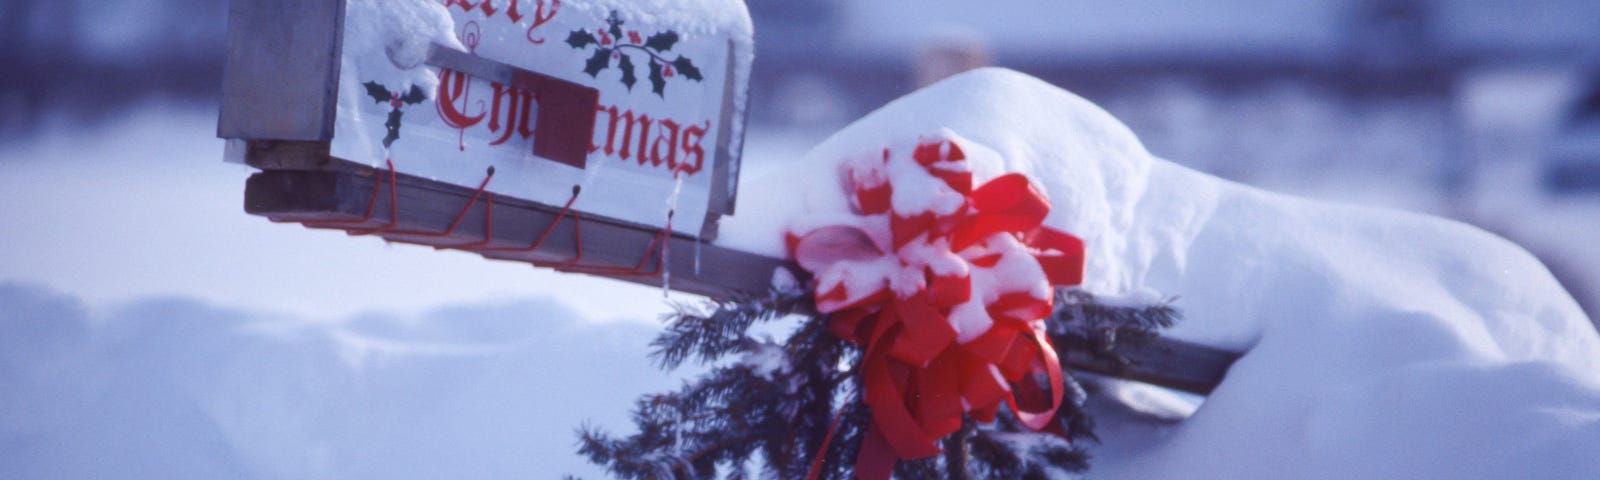 Mailbox with the words “Merry Christmas,” a red bow, and a small evergreen tree branch protrude from a snow bank.